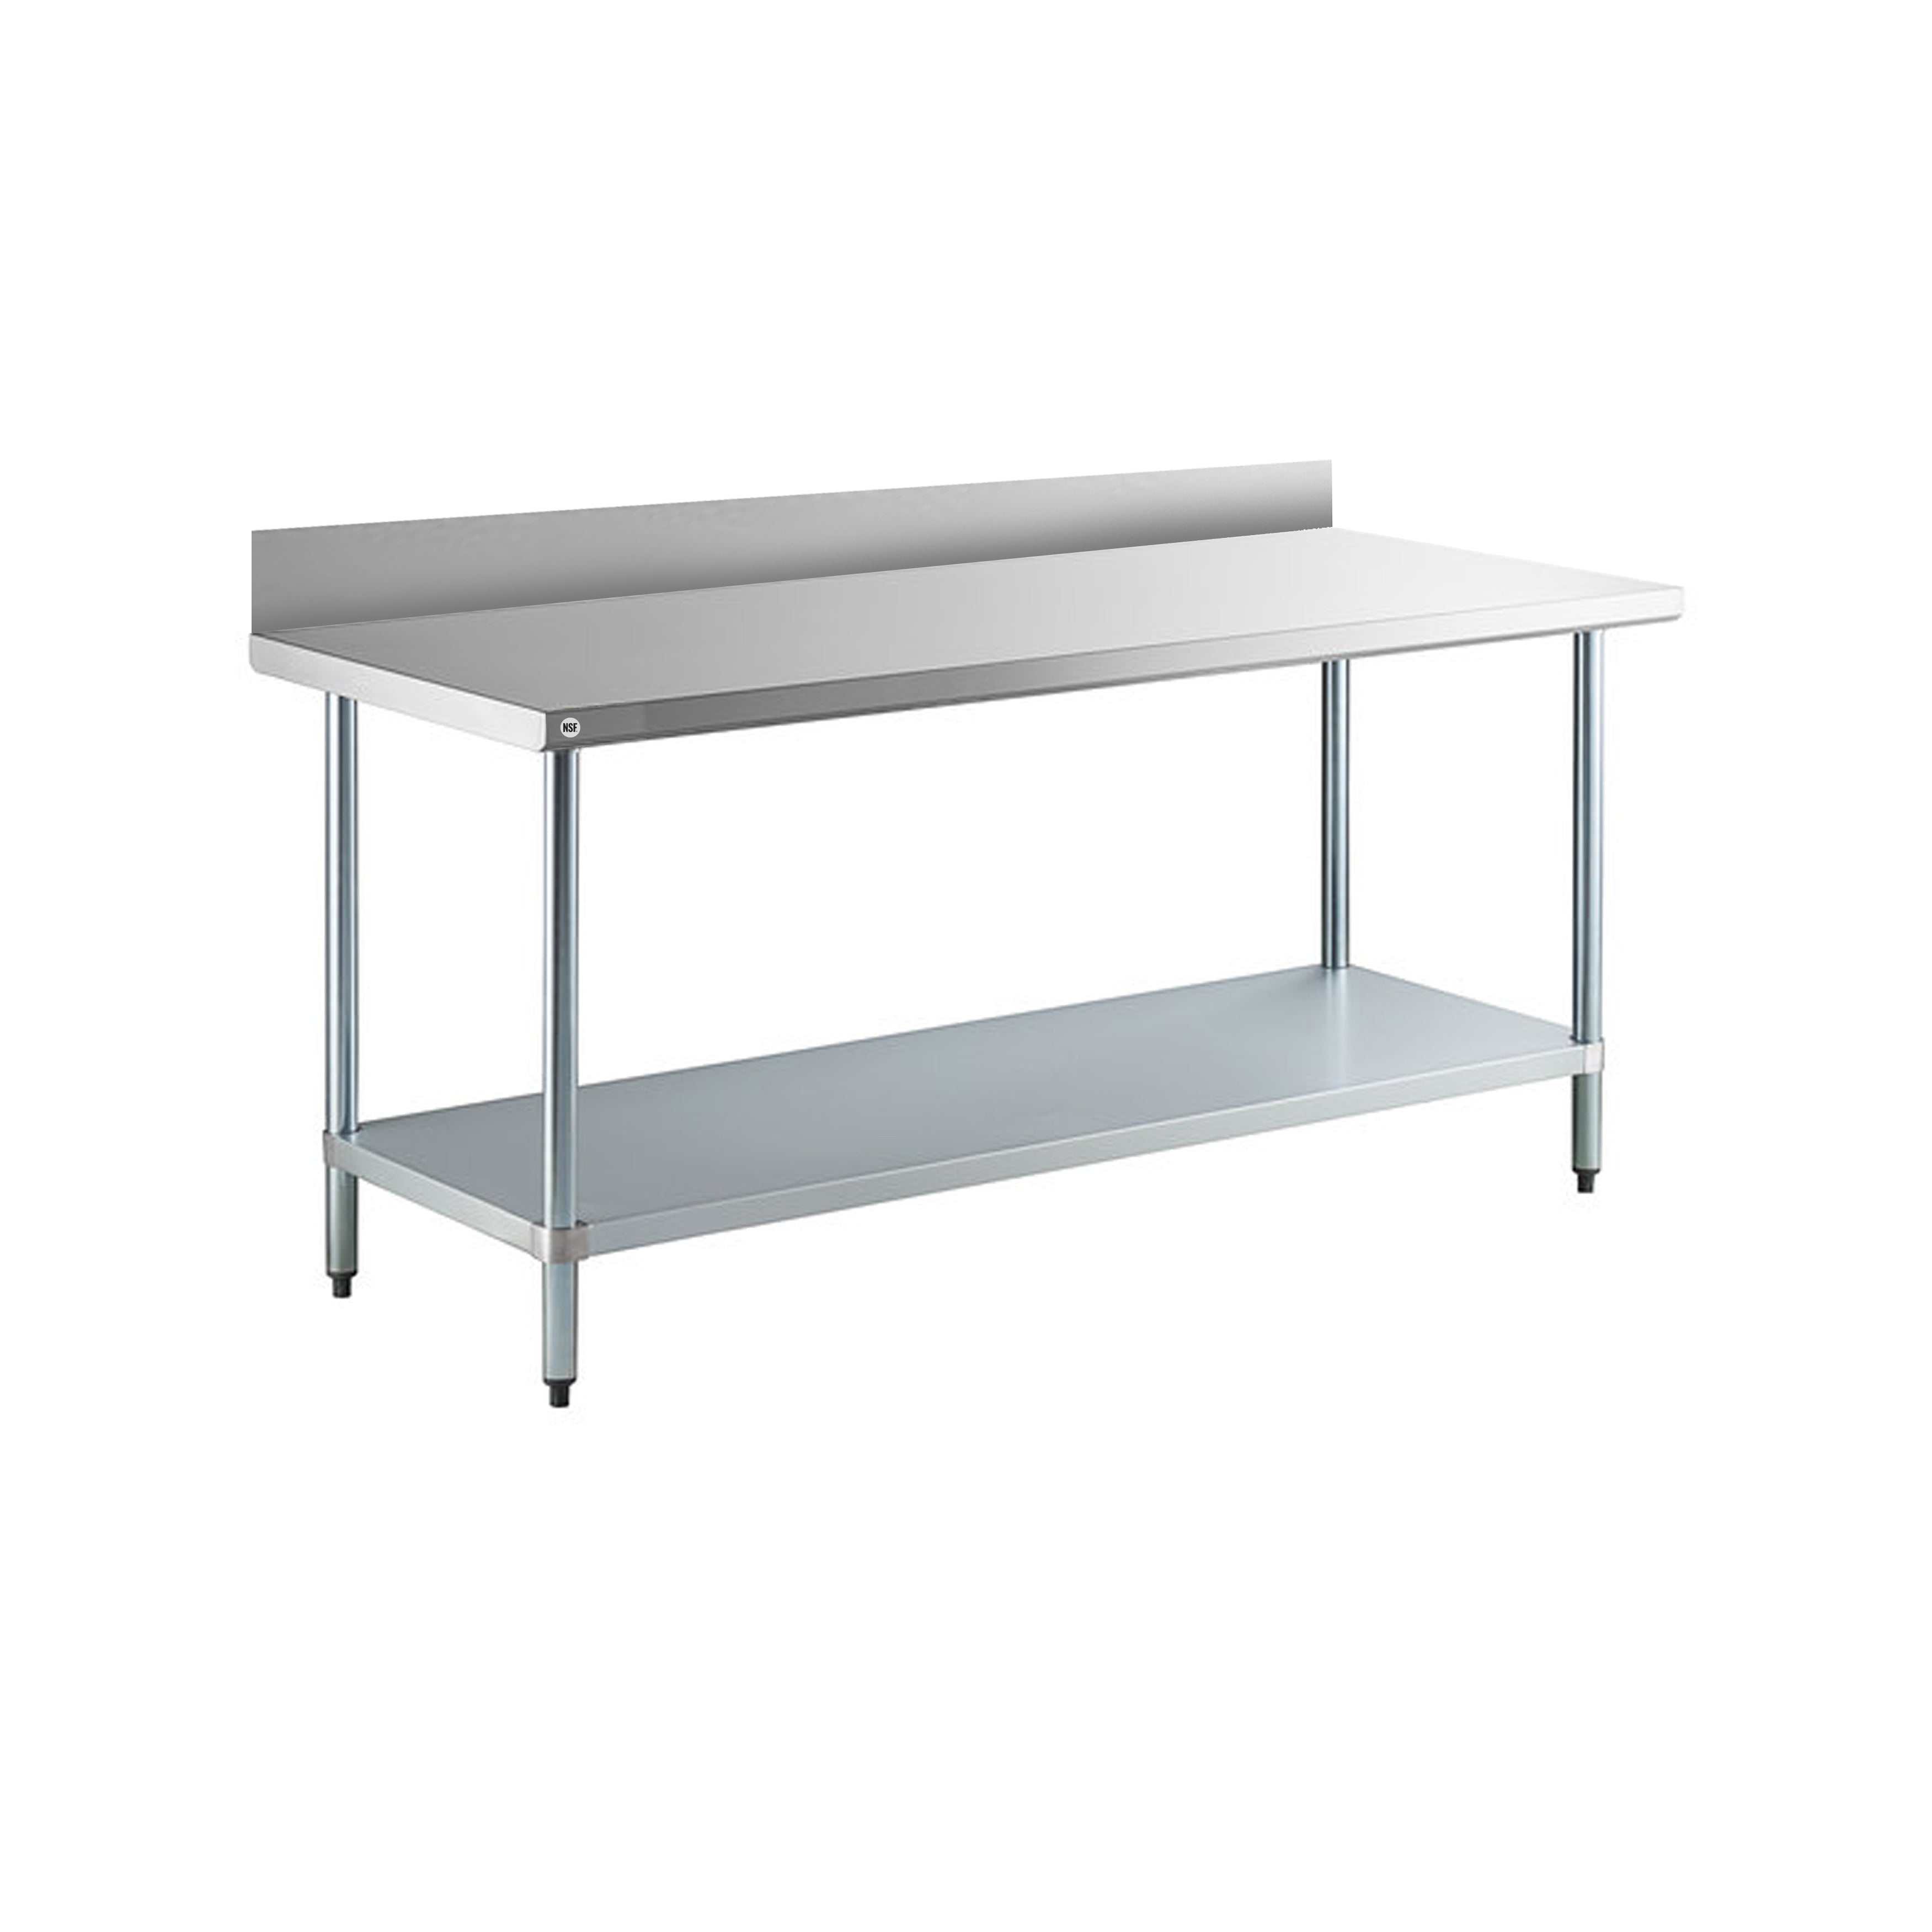 Omcan - 22084, Commercial 24" x 84" Stainless Steel Kitchen Work Table with 4" BackSplash 1500lbs Light Duty